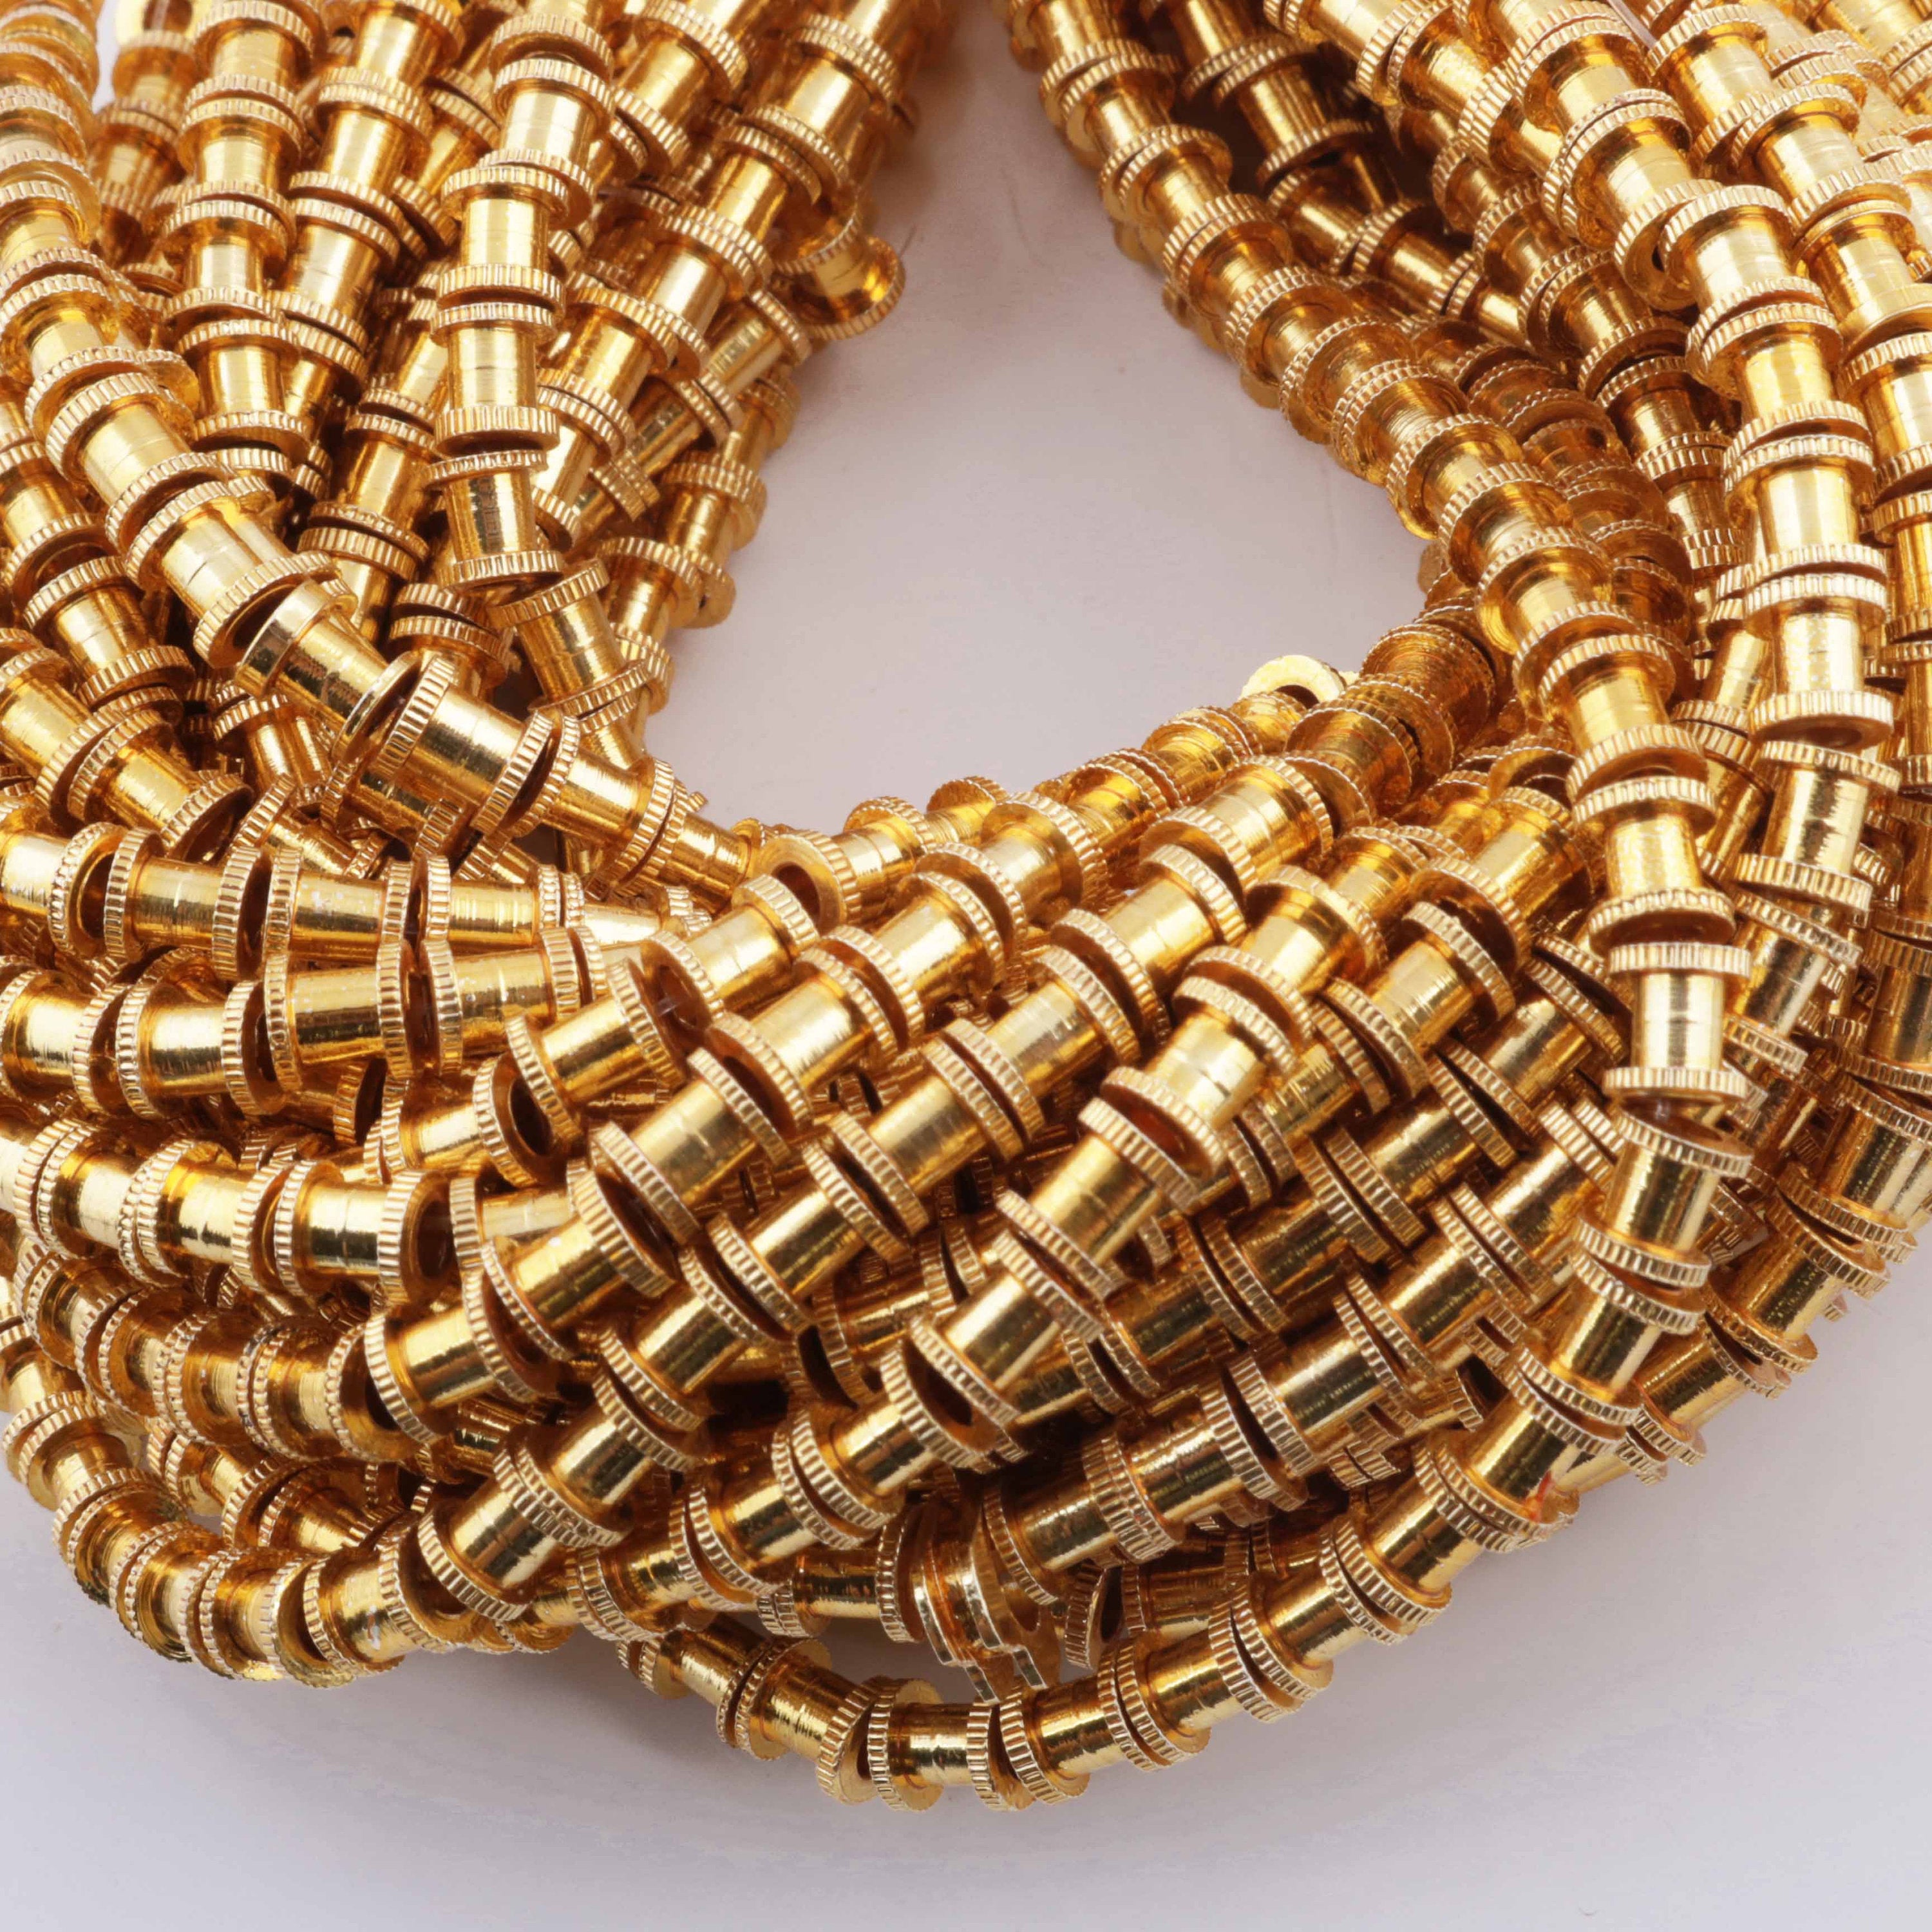 2 Strands 24k Gold Plated Designer Copper Casting Fancy Tube Beads -  5mmx5mm - Jewelry - 7.5 Inches GPC744